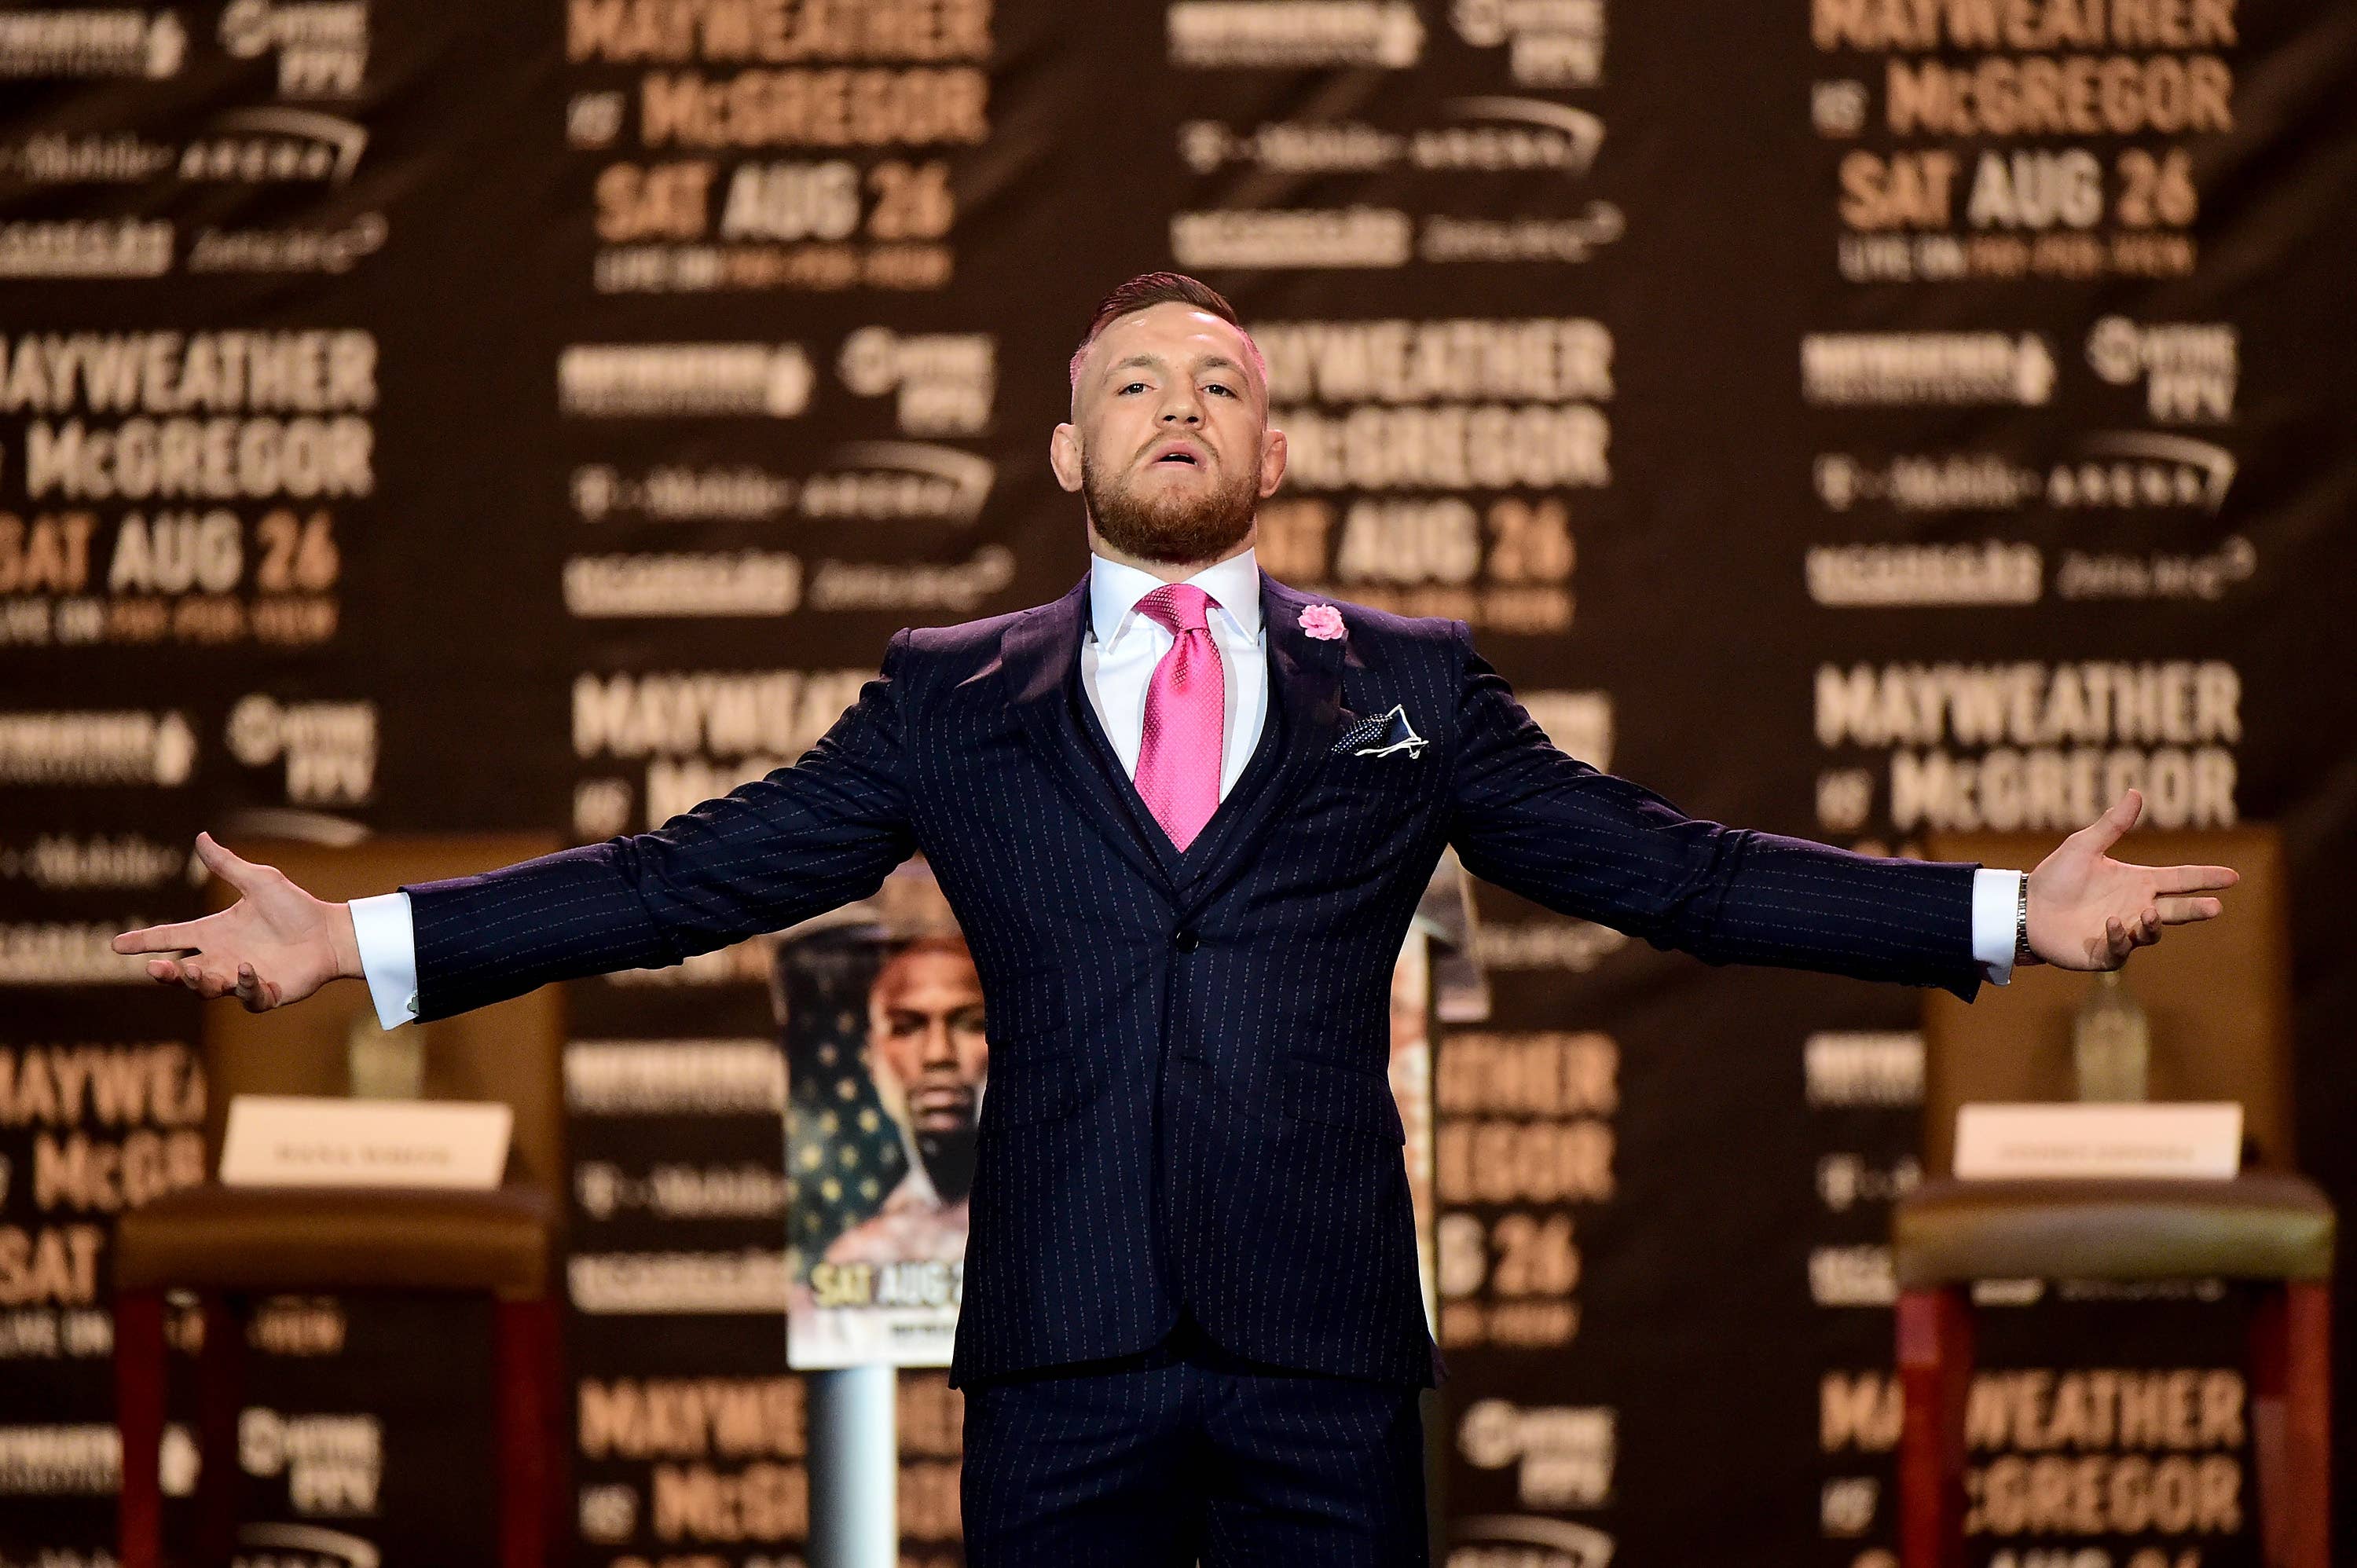 Conor McGregor on tour promoting Floyd Mayweather fight